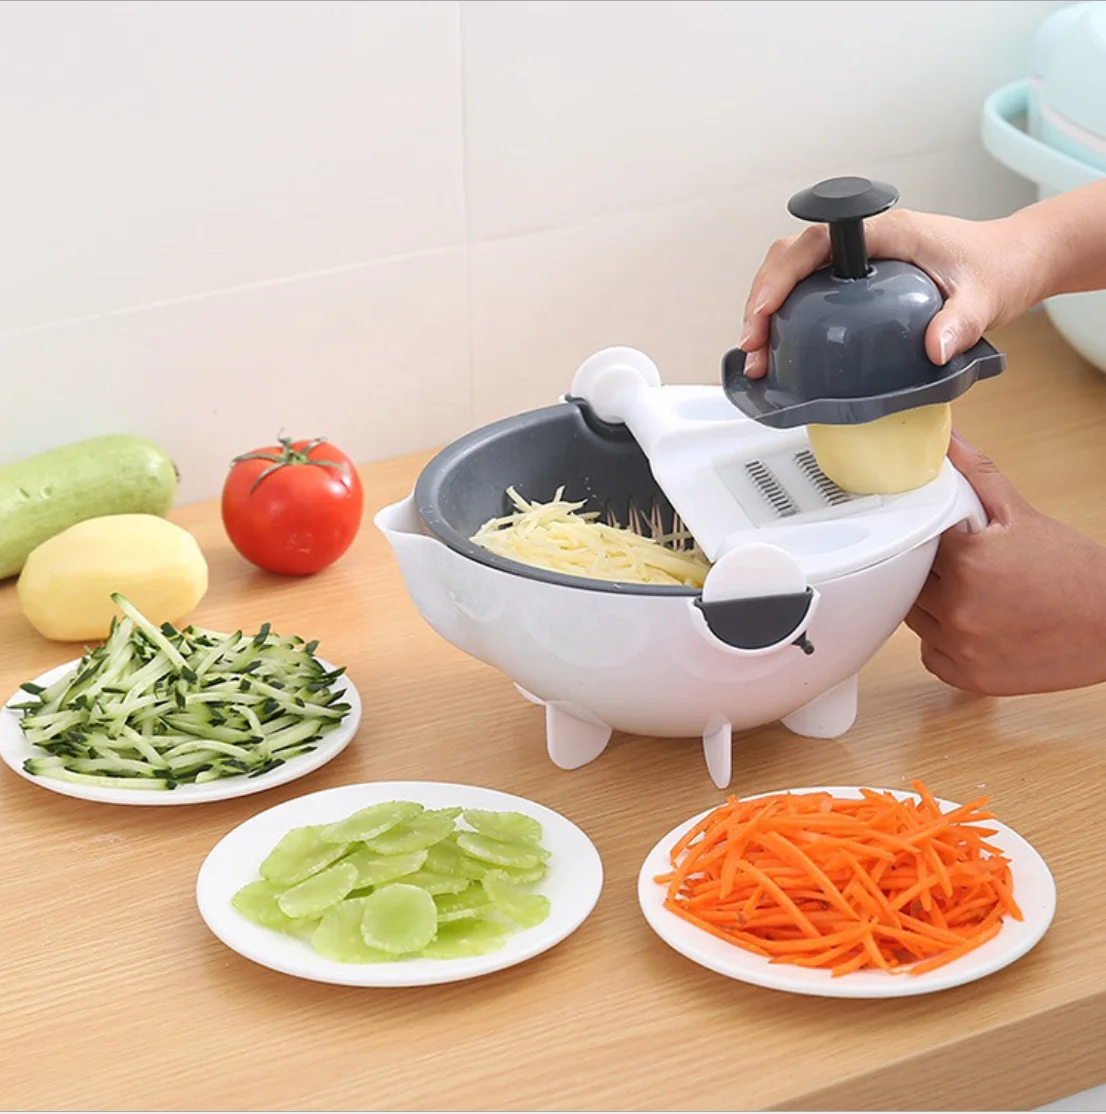 

9 in 1 Manual Rotate Veggie Slicer Grater Multifunctional Vegetable Chopper Cutter with Drain Basket, White+gray